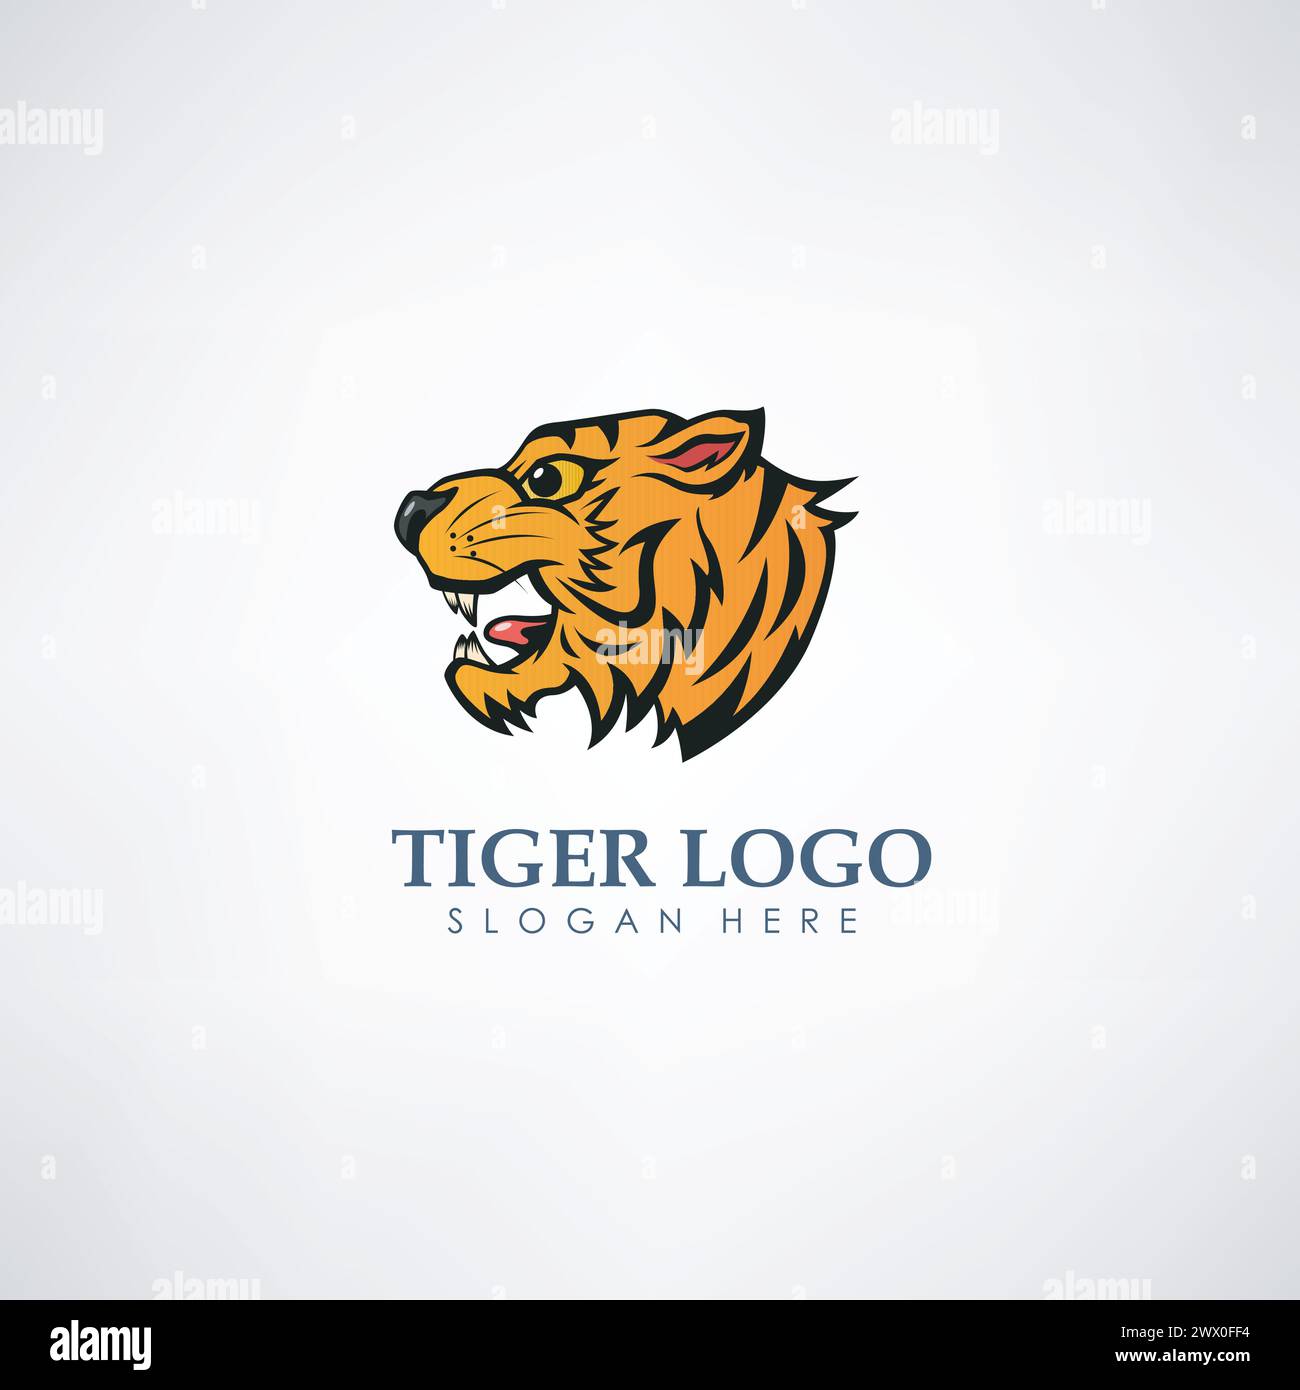 Tiger Head Concept Logo Template. Label For Hunting, Company Or Organization, Vector Illustration Stock Vector